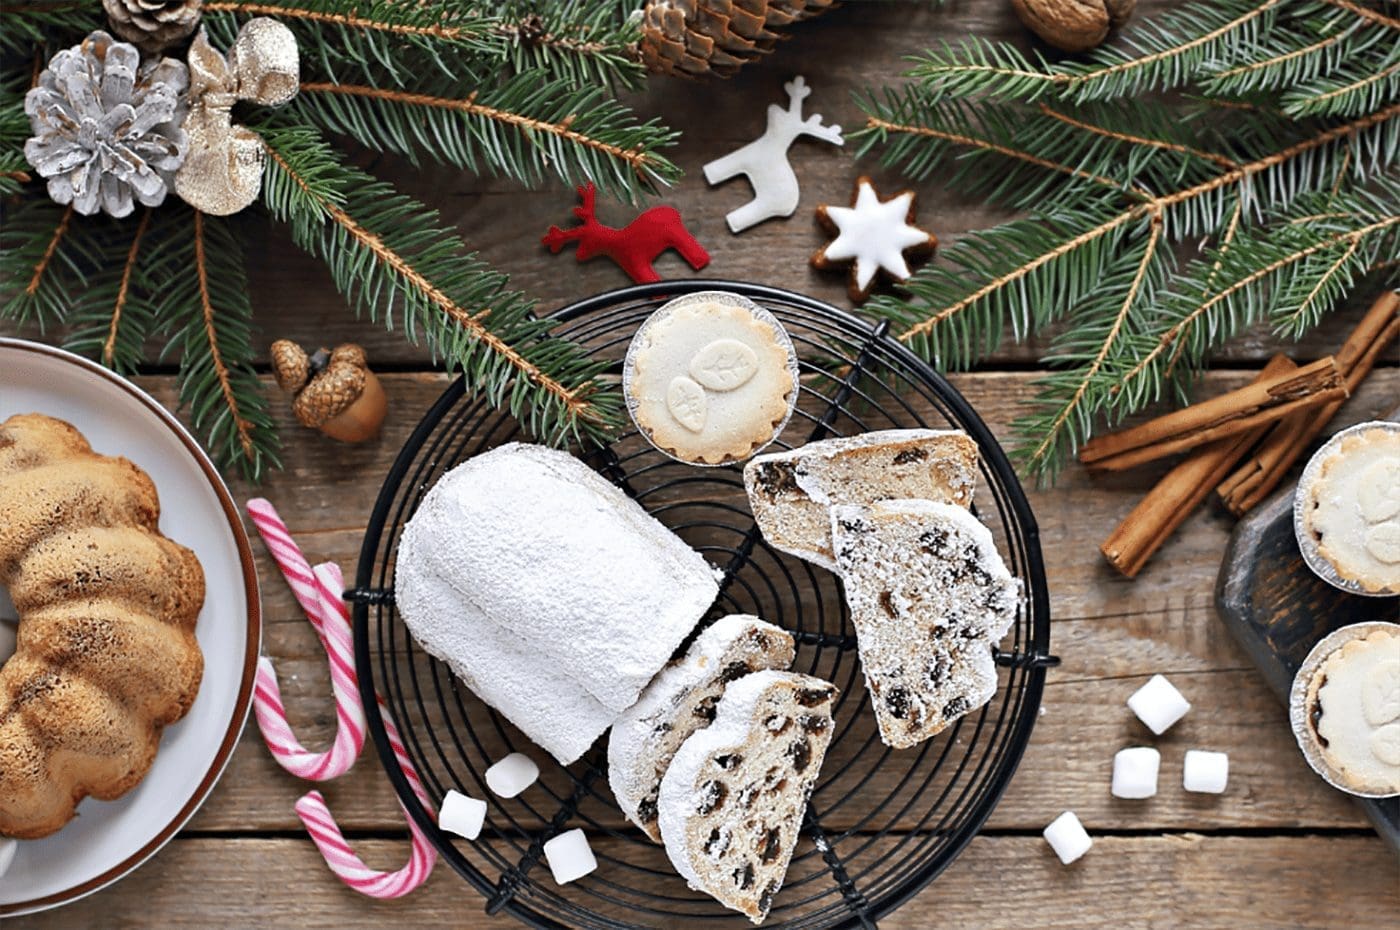 Here's the 4 best cannabinoids to use to triumph with the munchies during the holidays.